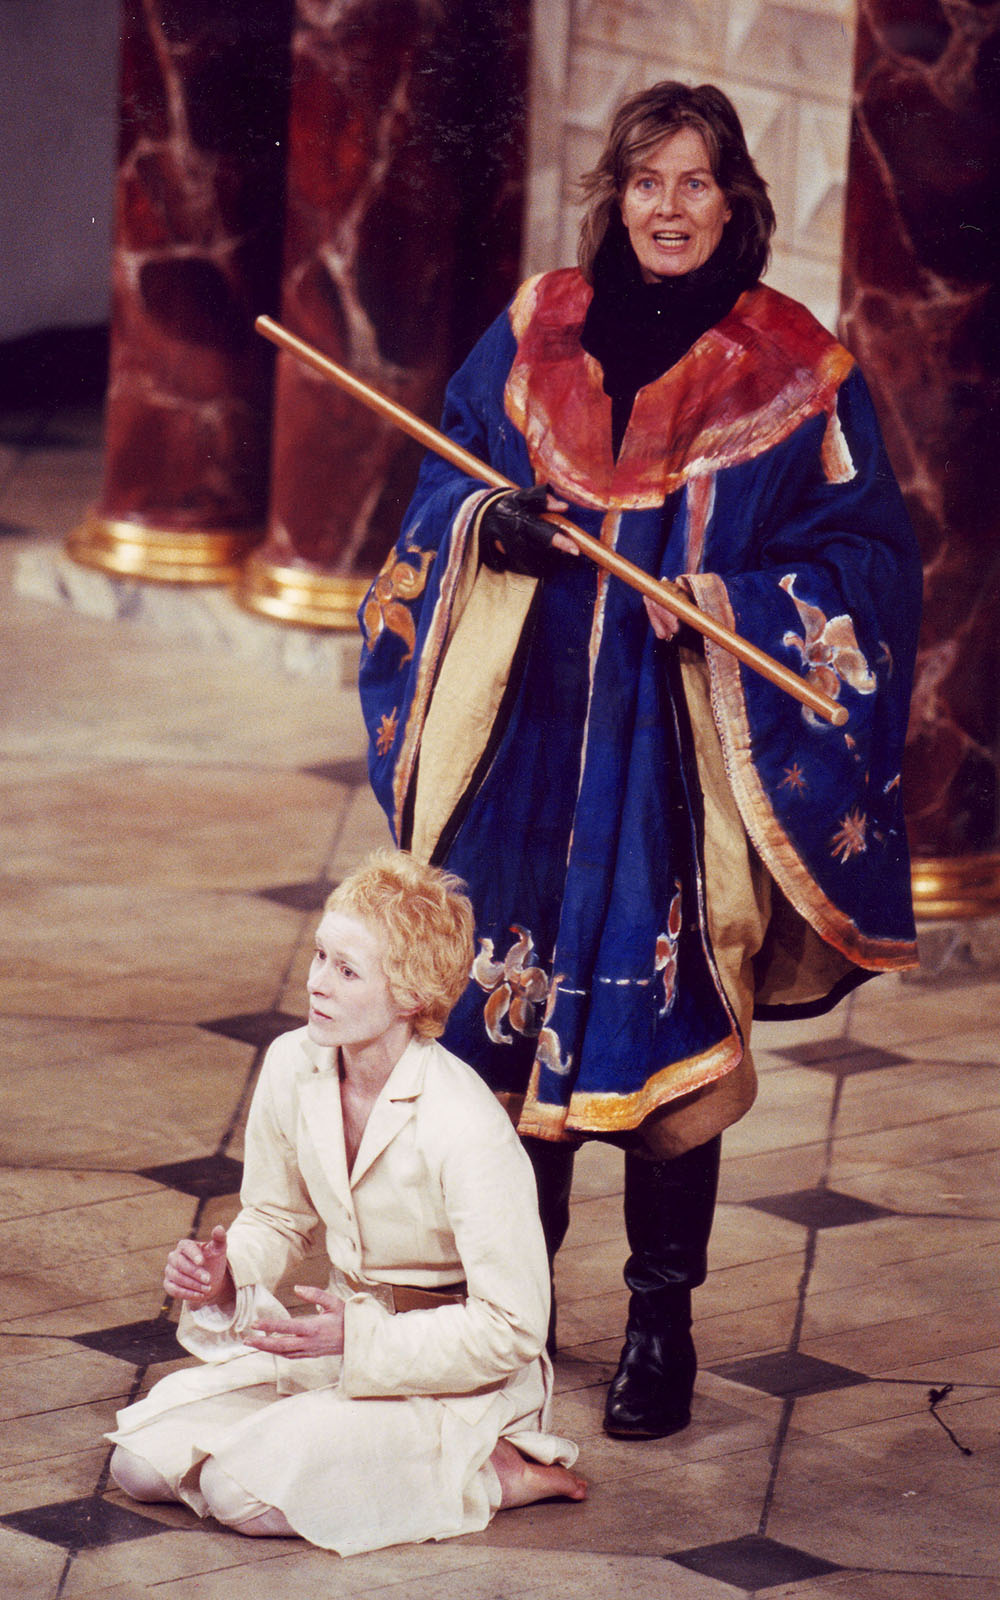 A woman in a cloak holding a staff stands over a pale-faced man dressed in white.